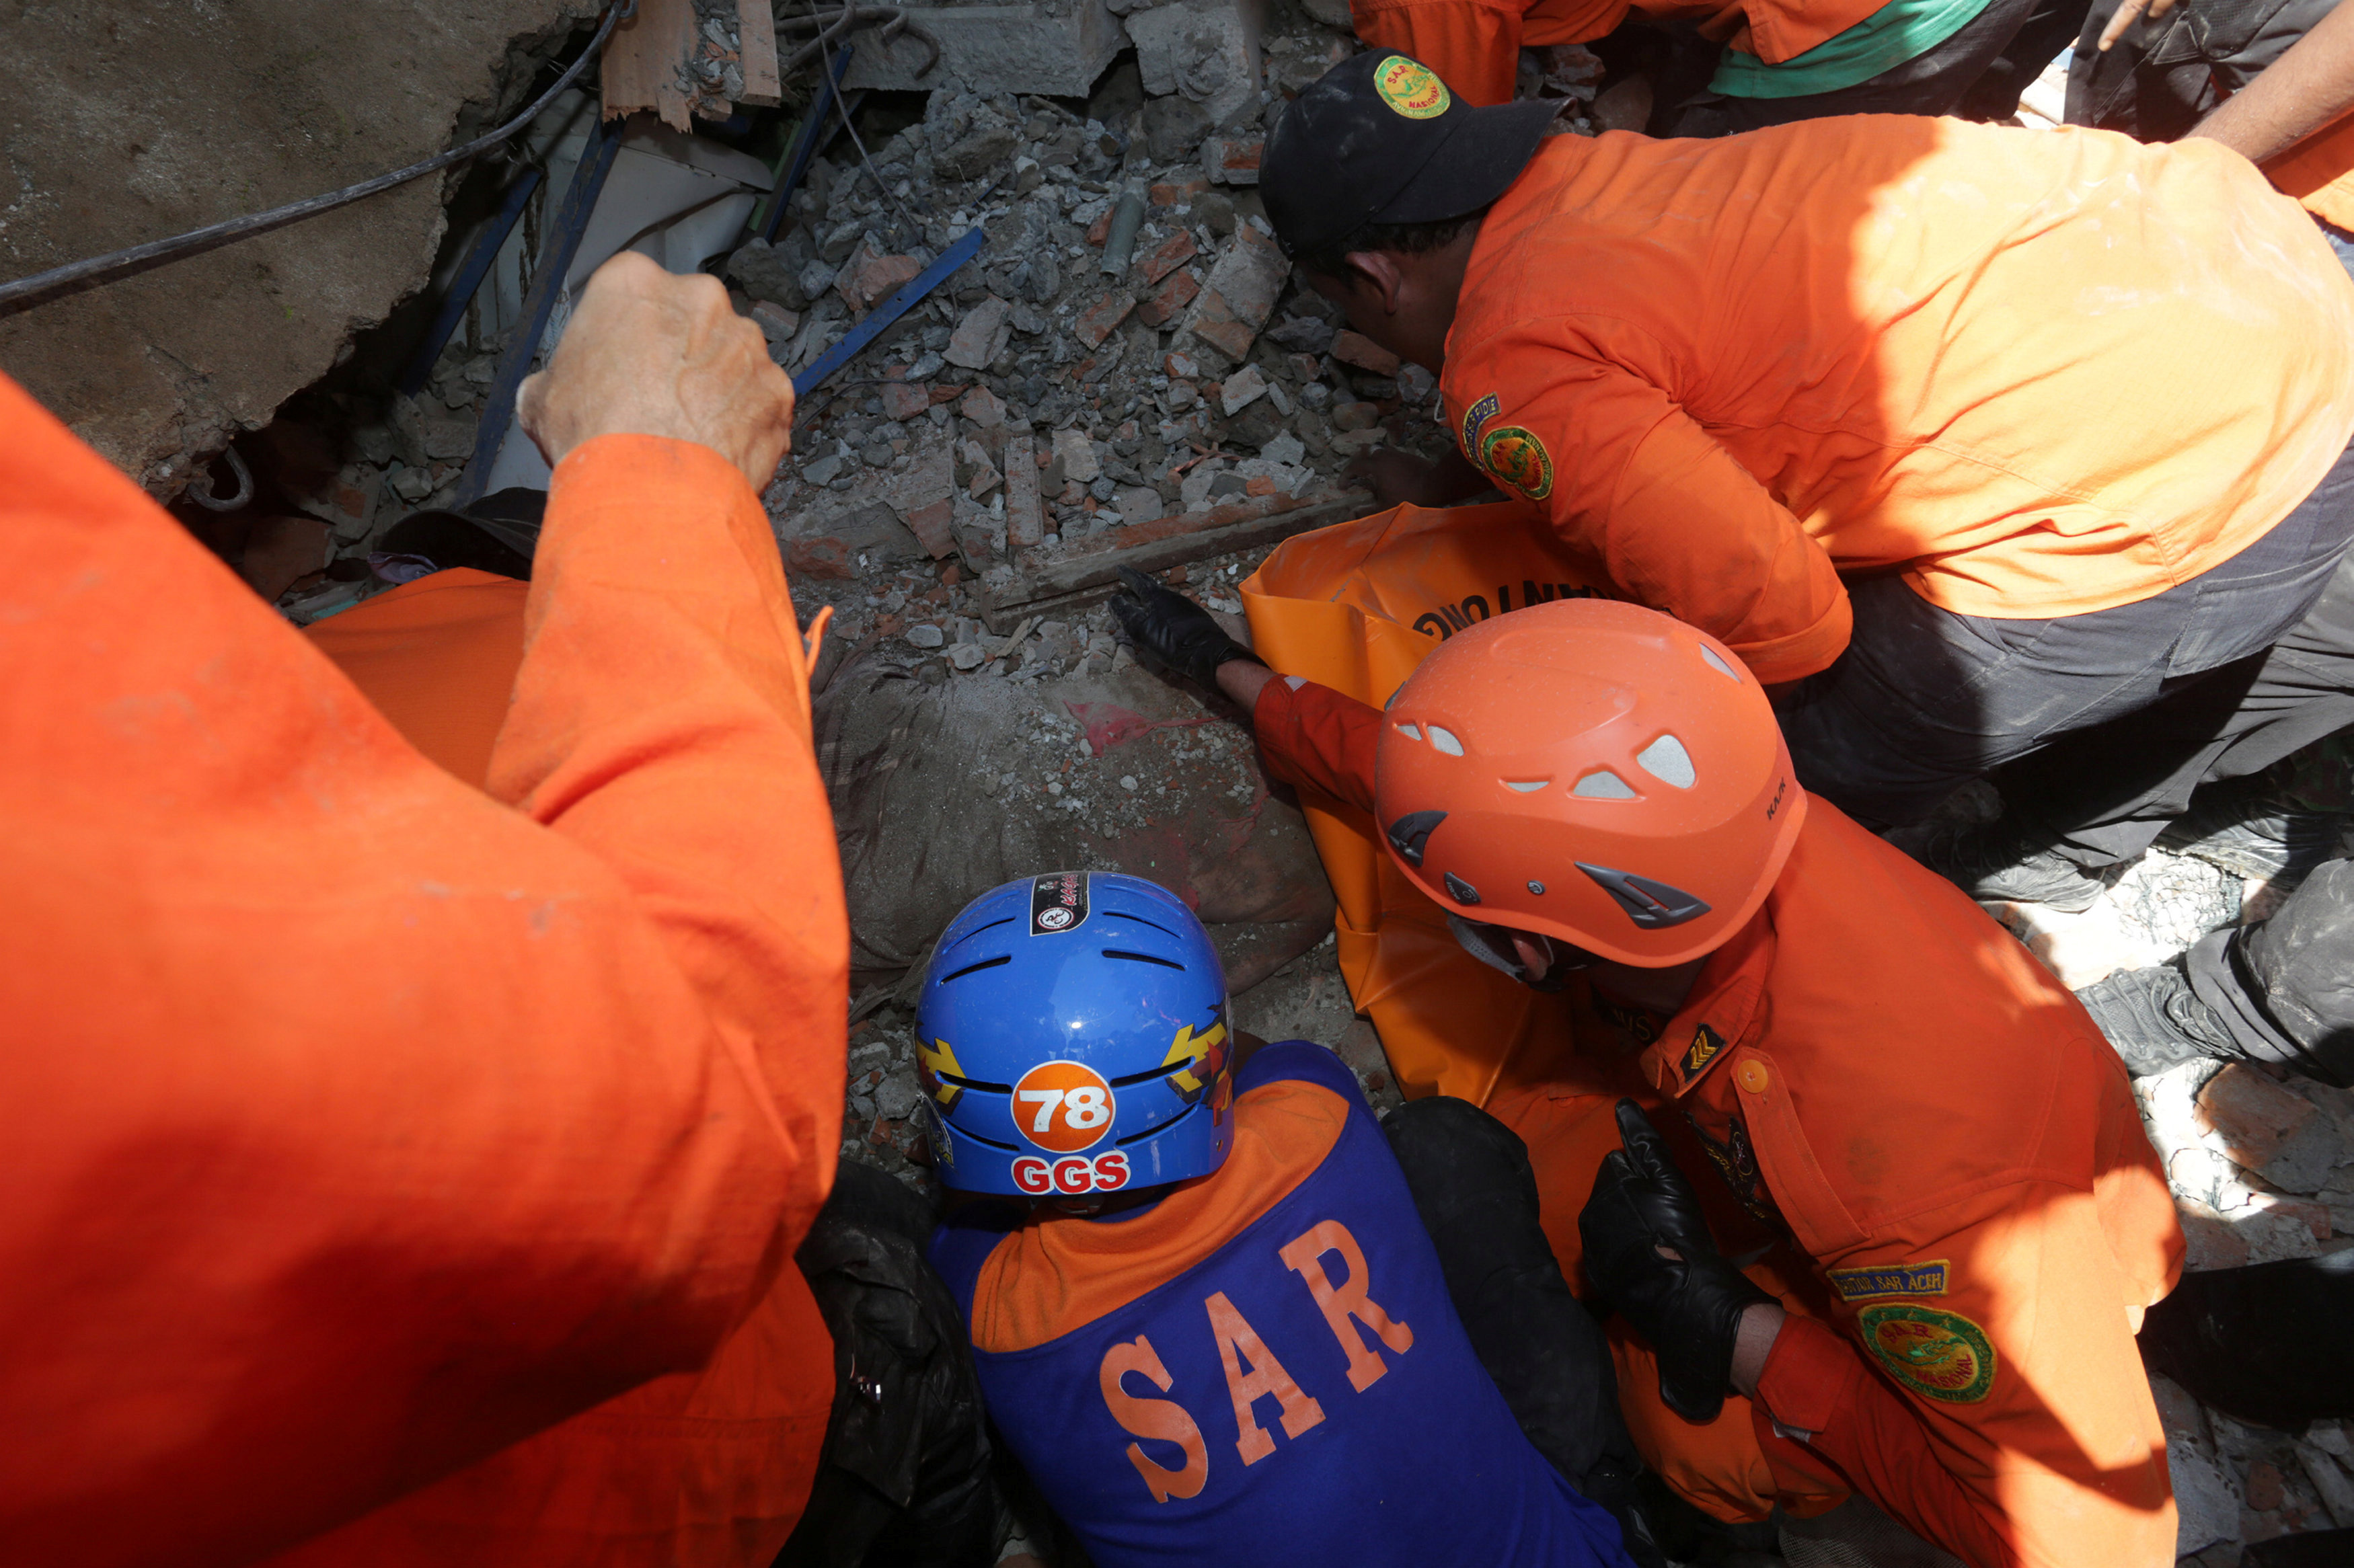 Rescue workers try to remove a victim from a collapsed building following an earthquake in Lueng Putu, Pidie Jaya in the northern province of Aceh, Indonesia December 7, 2016 in this photo taken by Antara Foto.  Antara Foto/Irwansyah Putra/via REUTERS